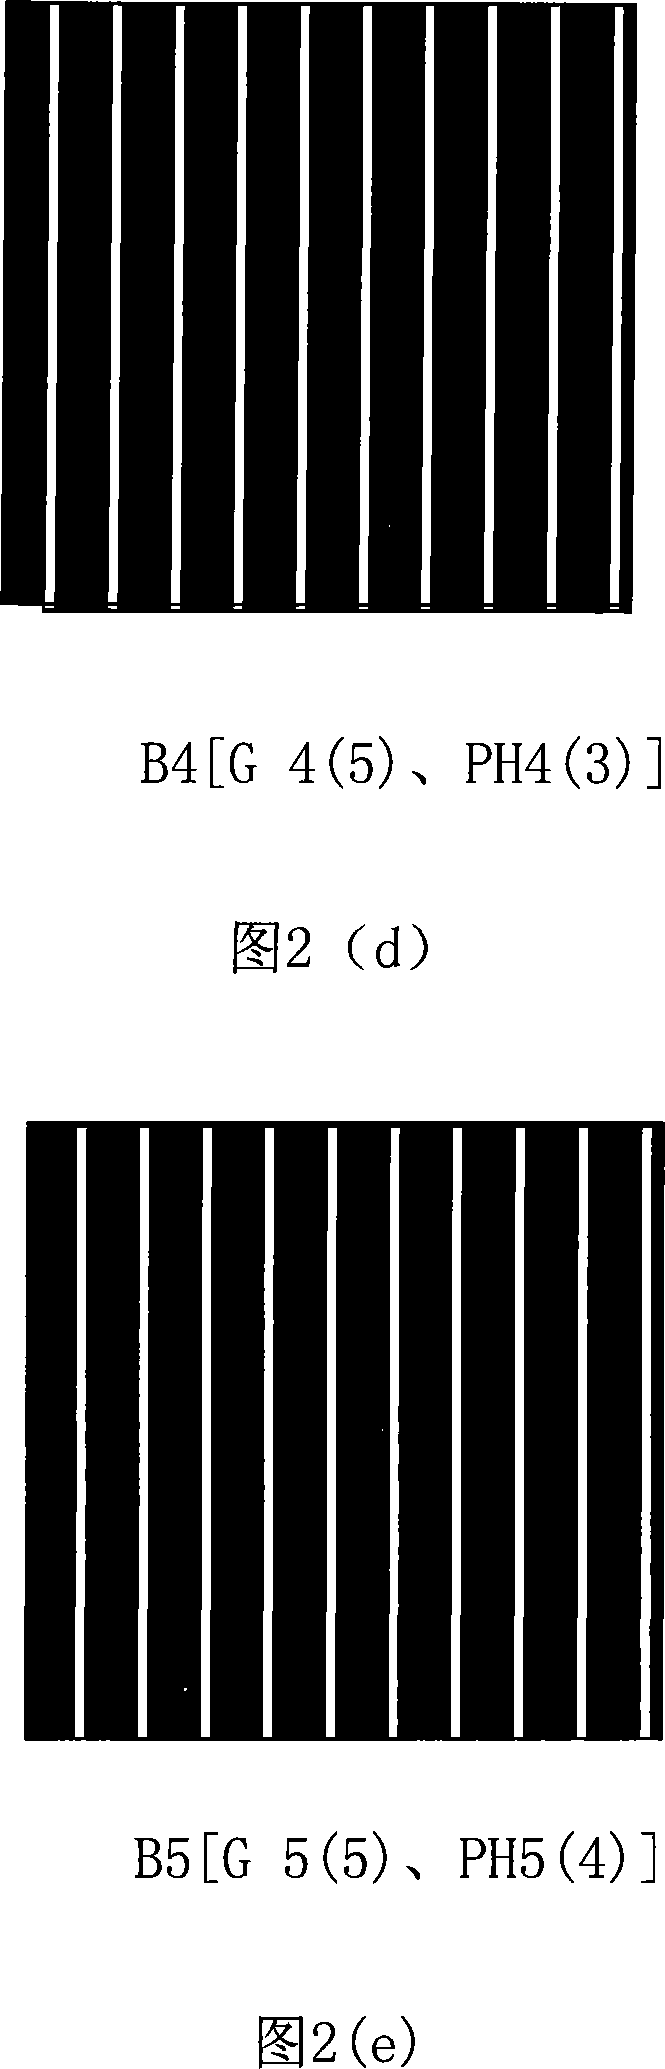 Bare hole visible liquid crystal raster stereoscopic picture display apparatus